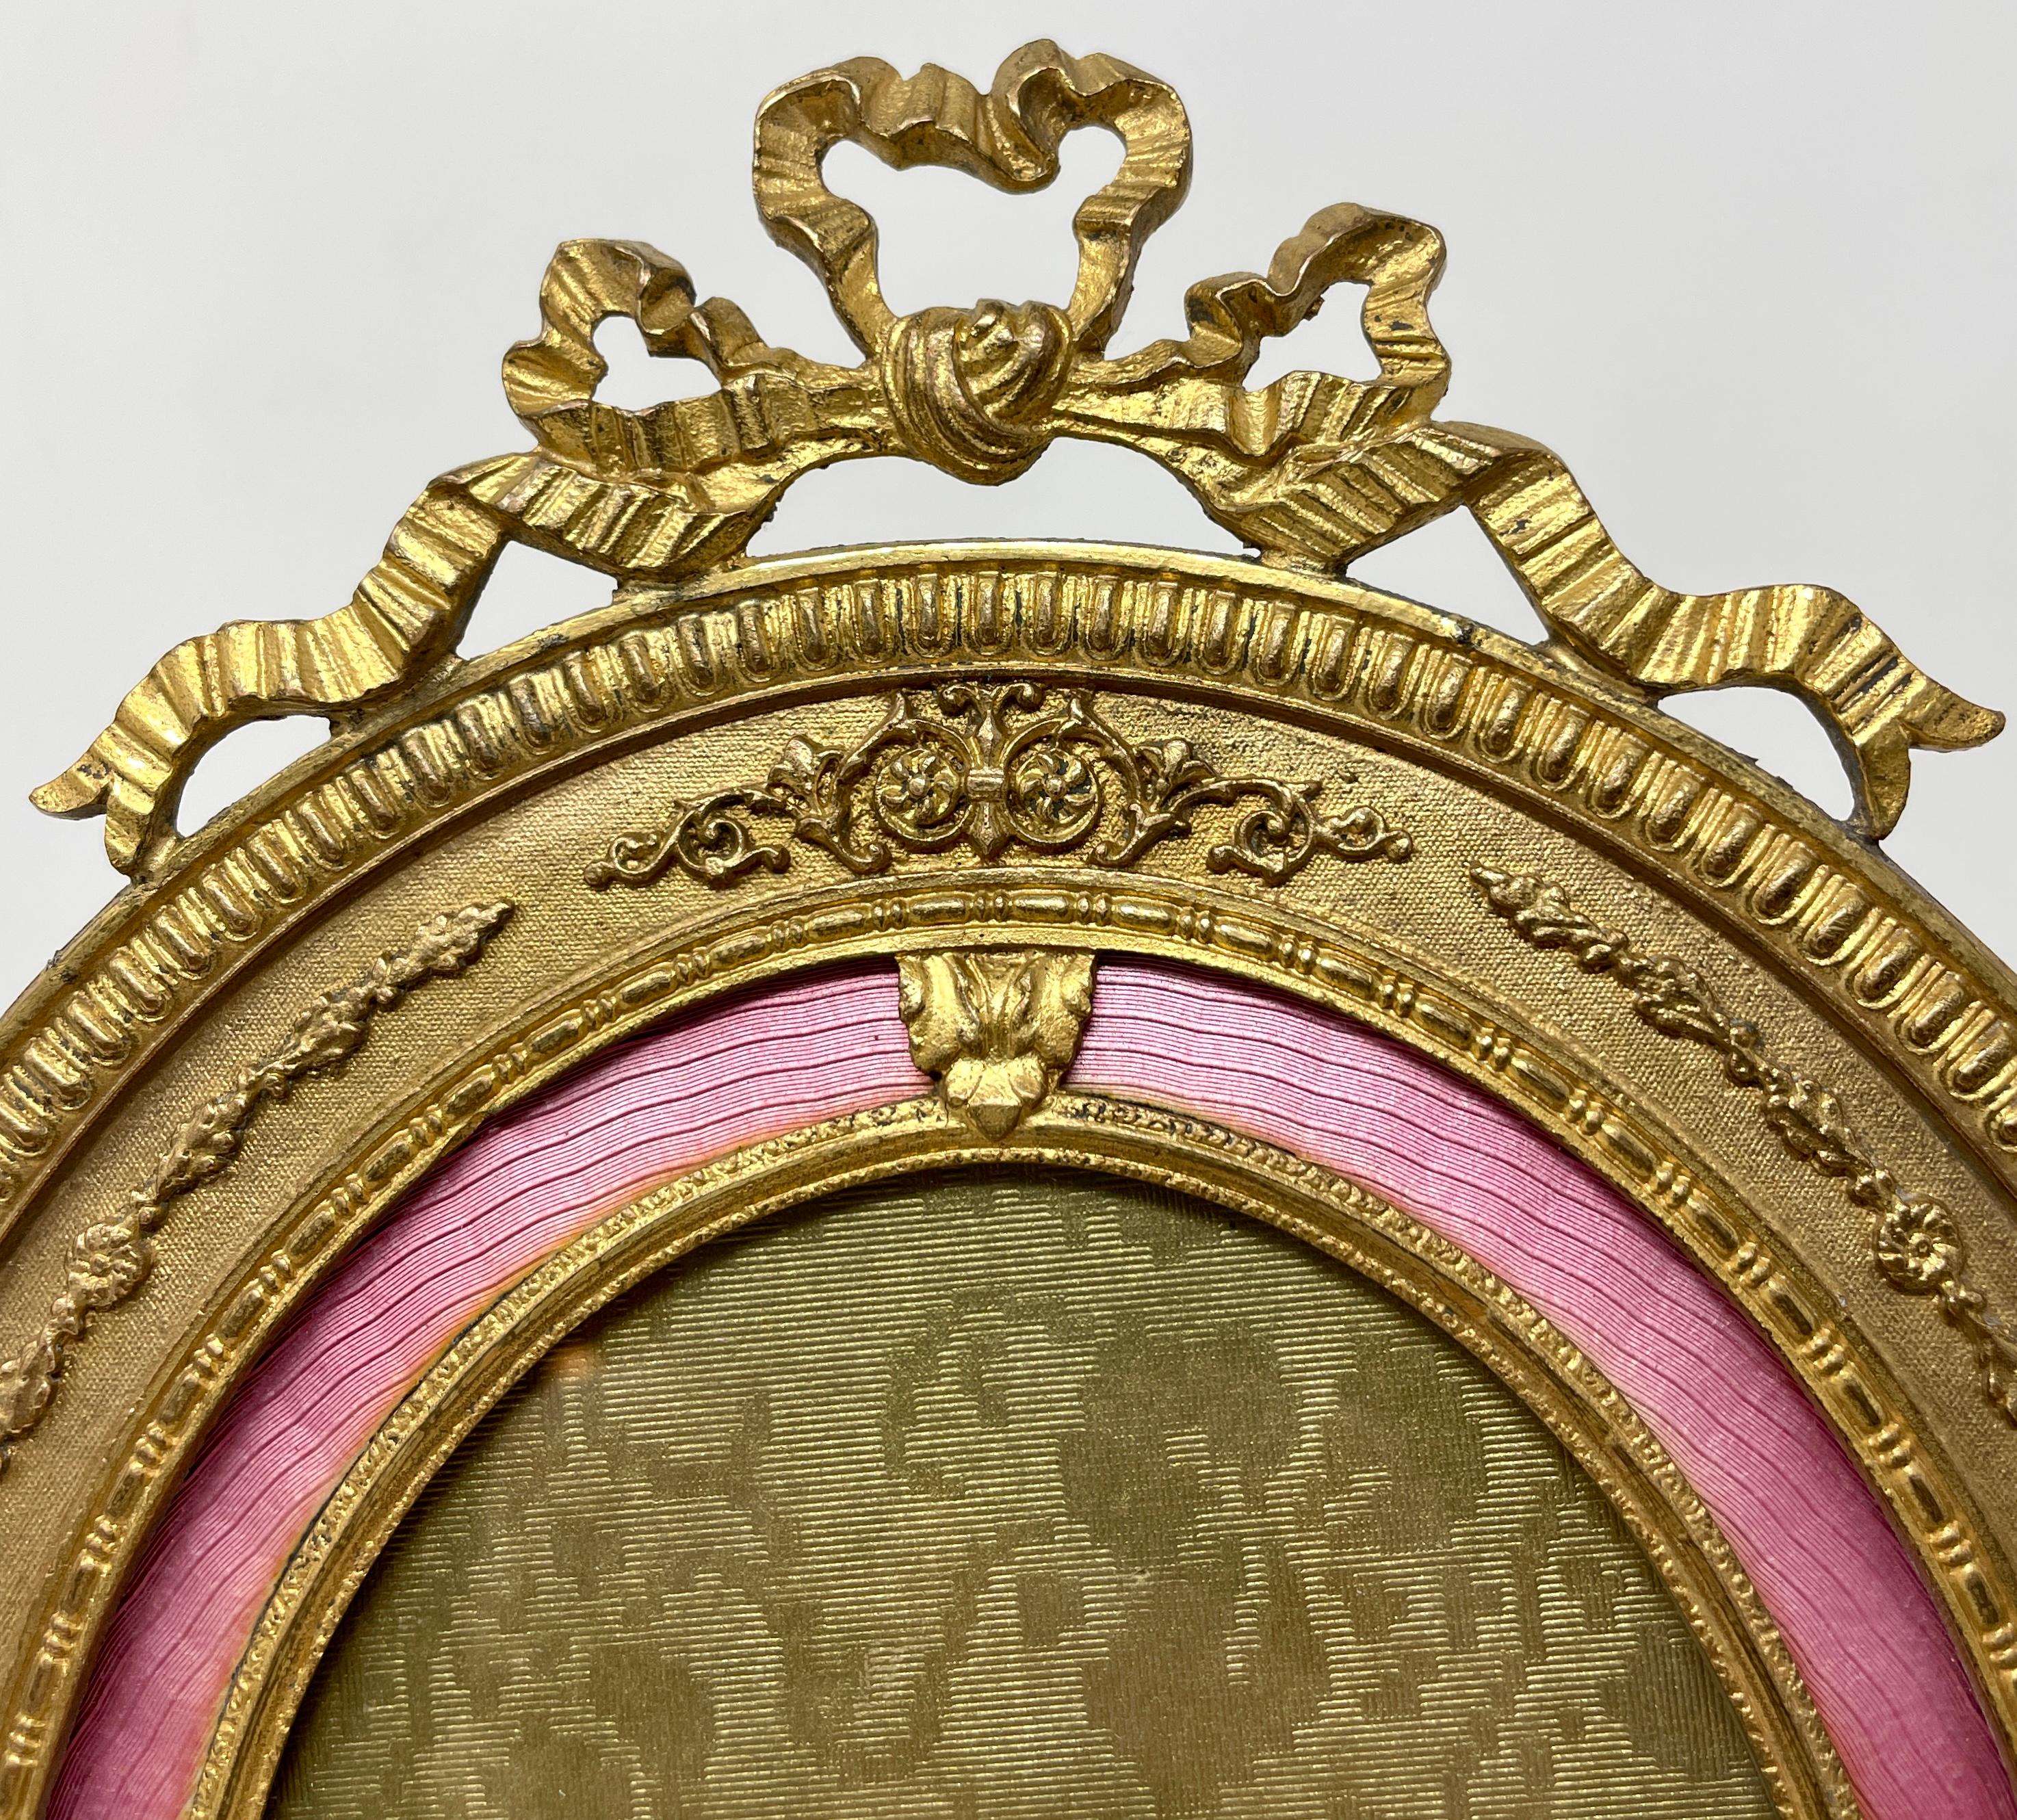 Antique French Louis XV style bronze d' ore enamel desktop picture frame. 
Photo size: 4 inches wide x 5 inches tall